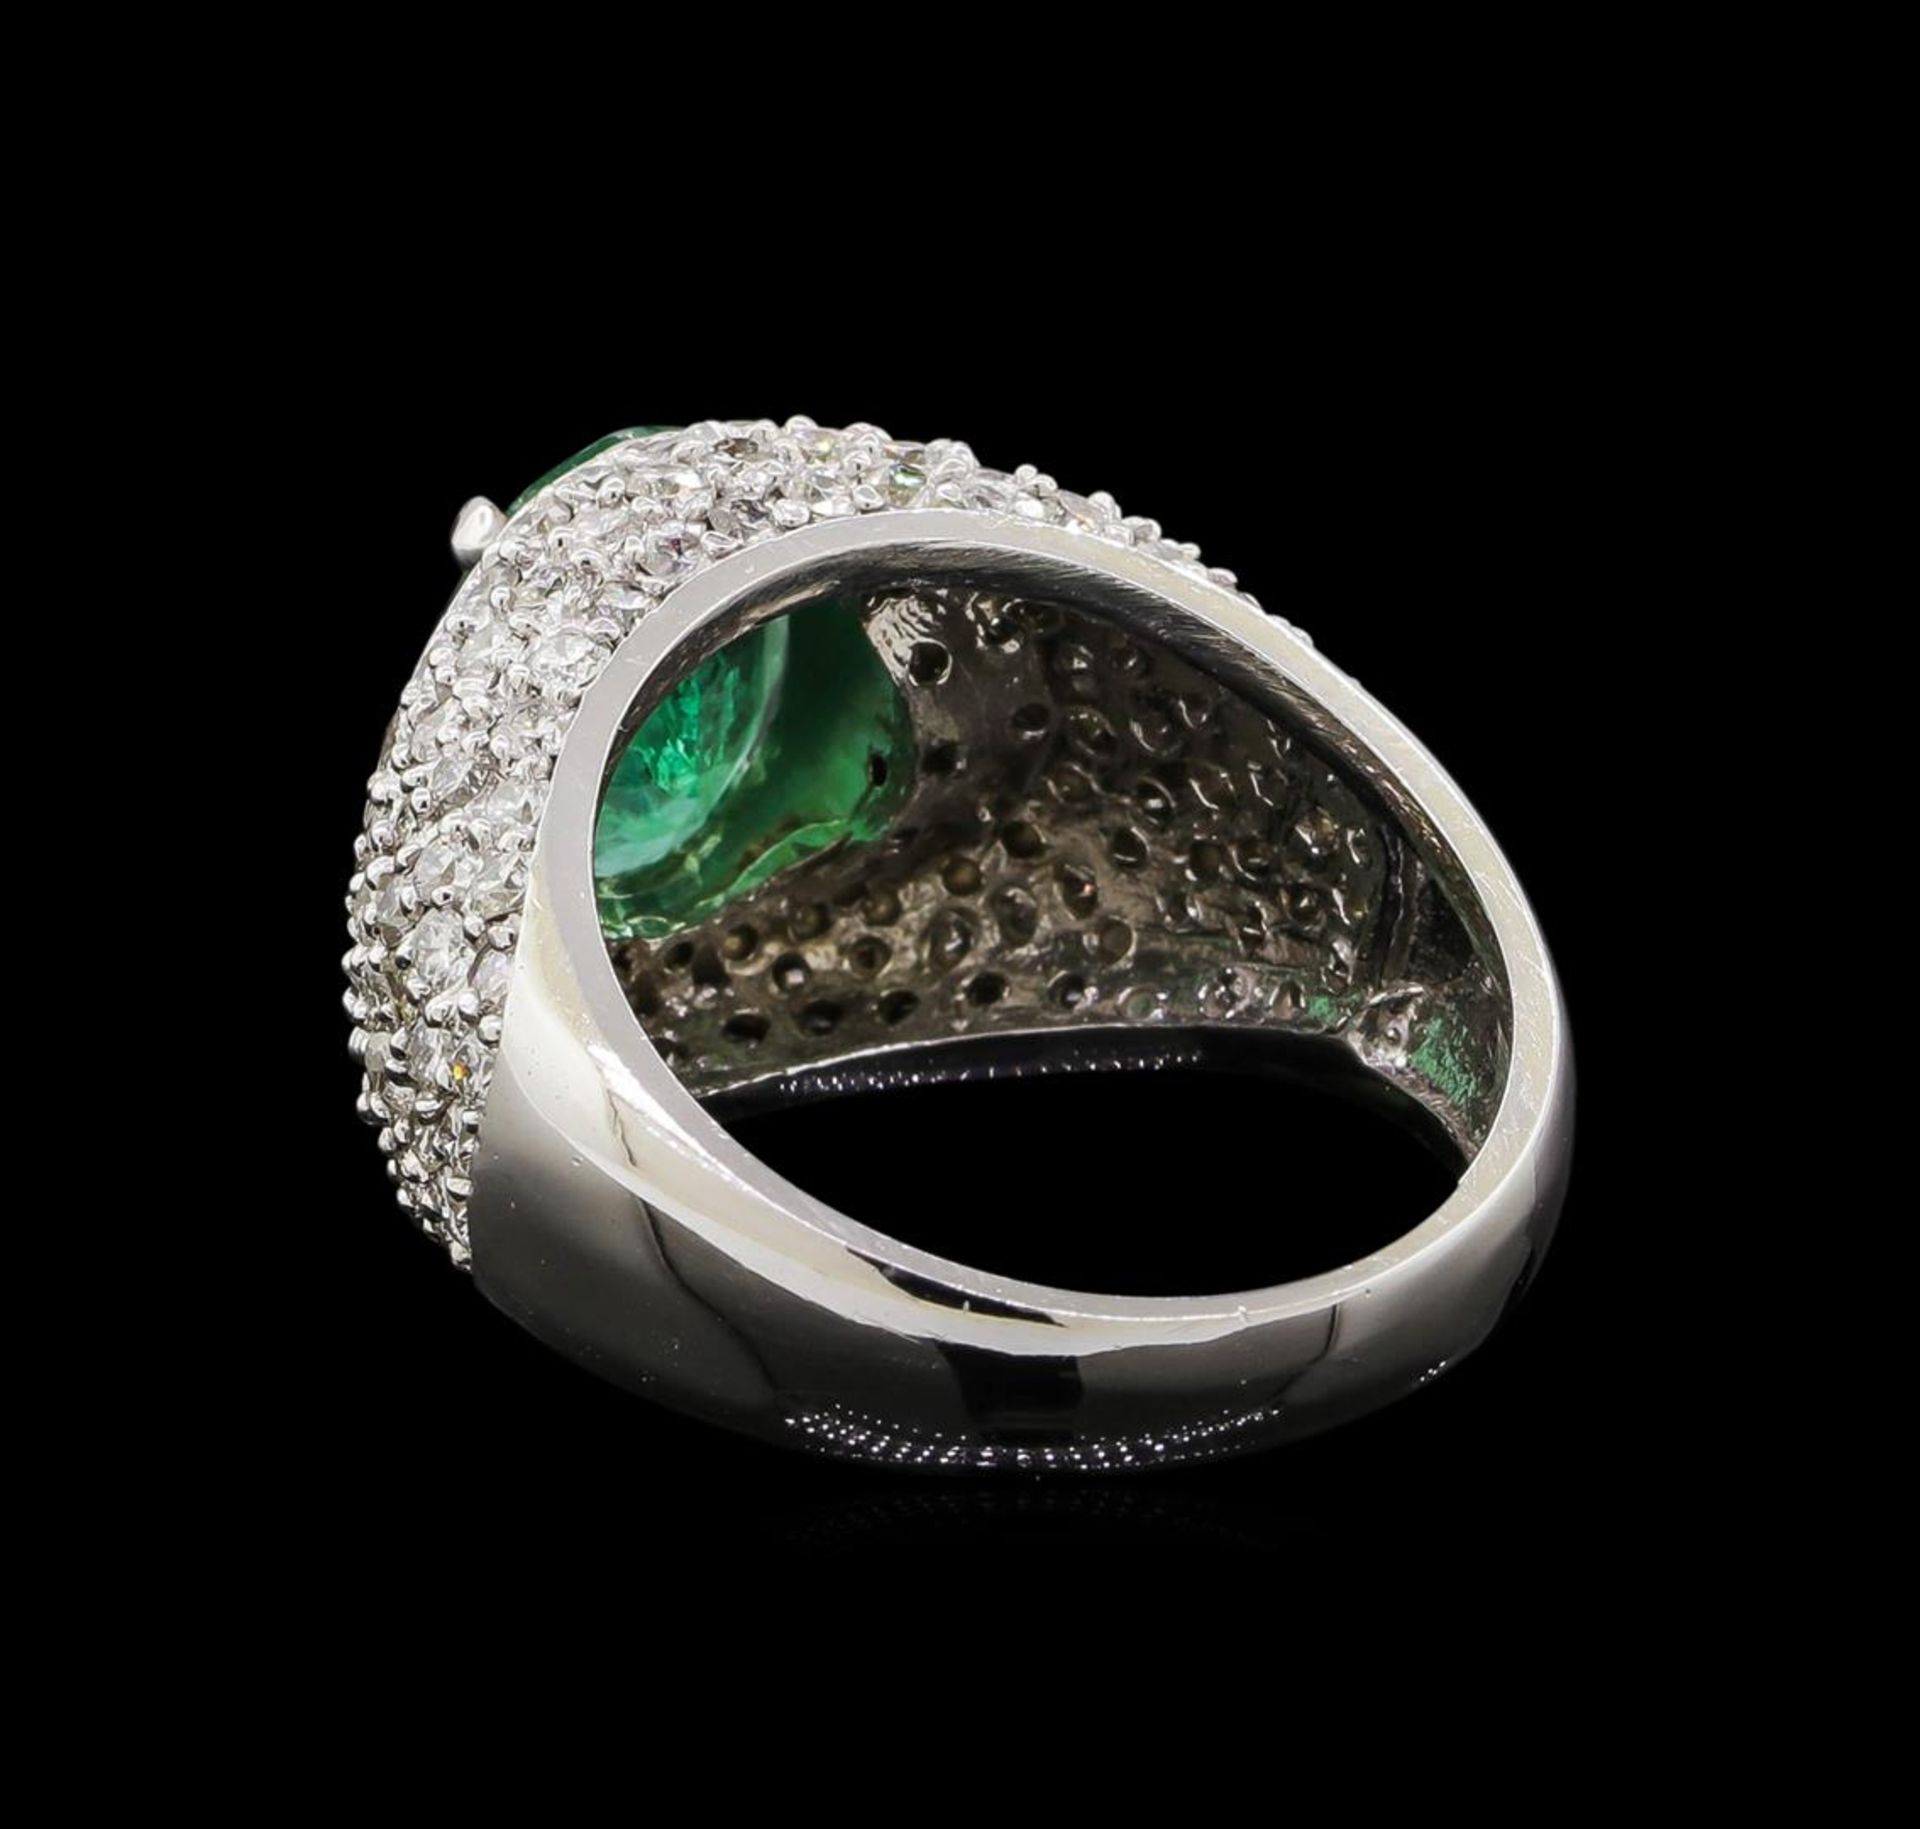 14KT White Gold 2.50 ctw Emerald and Diamond Ring - Image 3 of 5